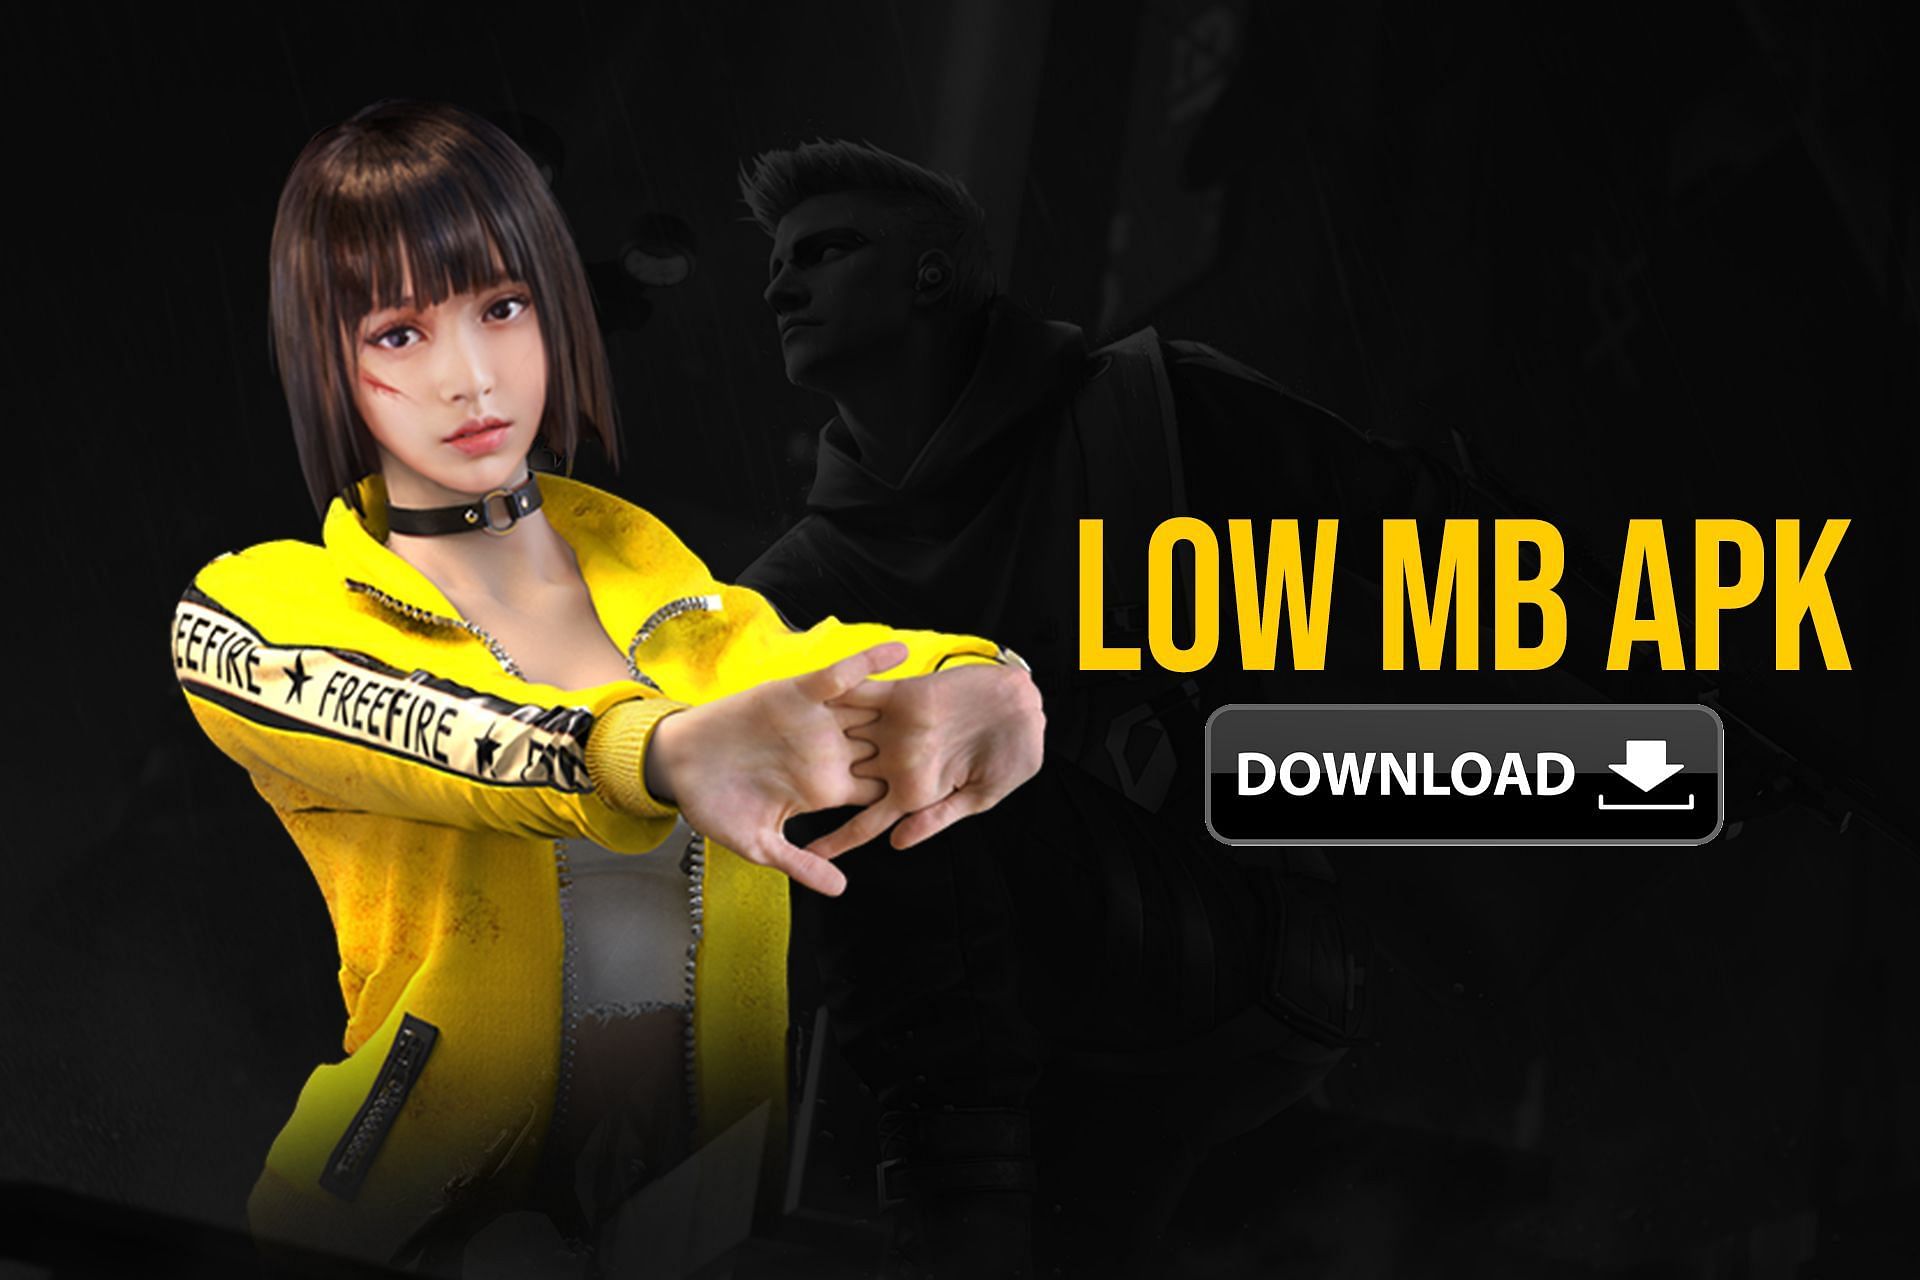 Fact Check: Do Free Fire max low MB APK download links work?